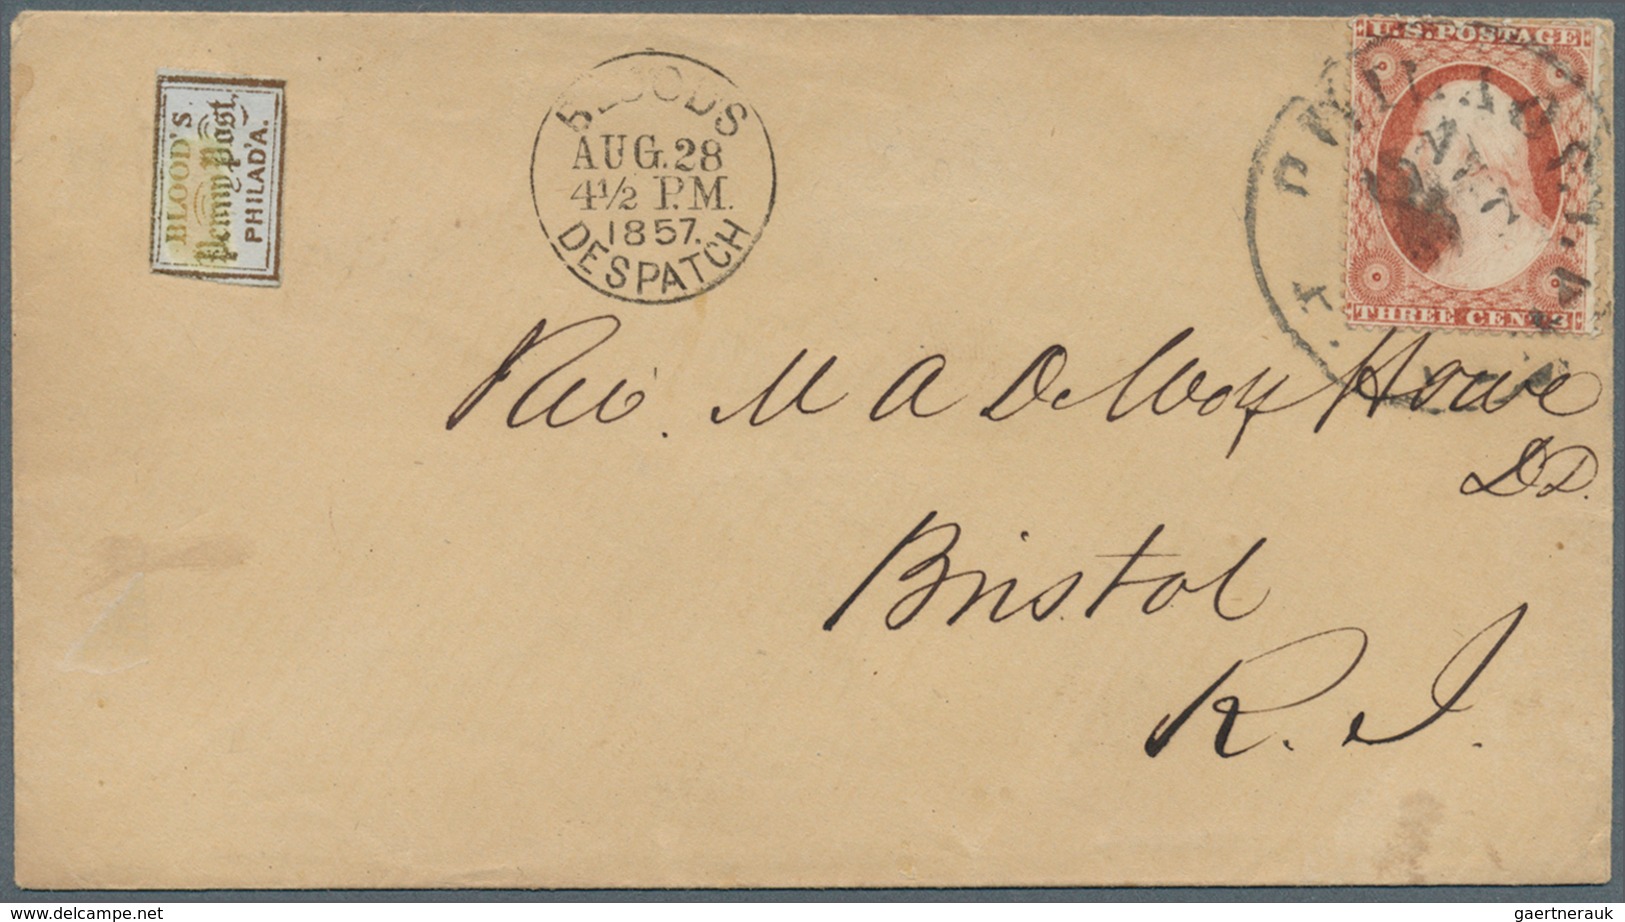 Vereinigte Staaten Von Amerika - Lokalausgaben + Carriers Stamps: D.O. BLOOD & CO. 1854: Two Covers - Locals & Carriers